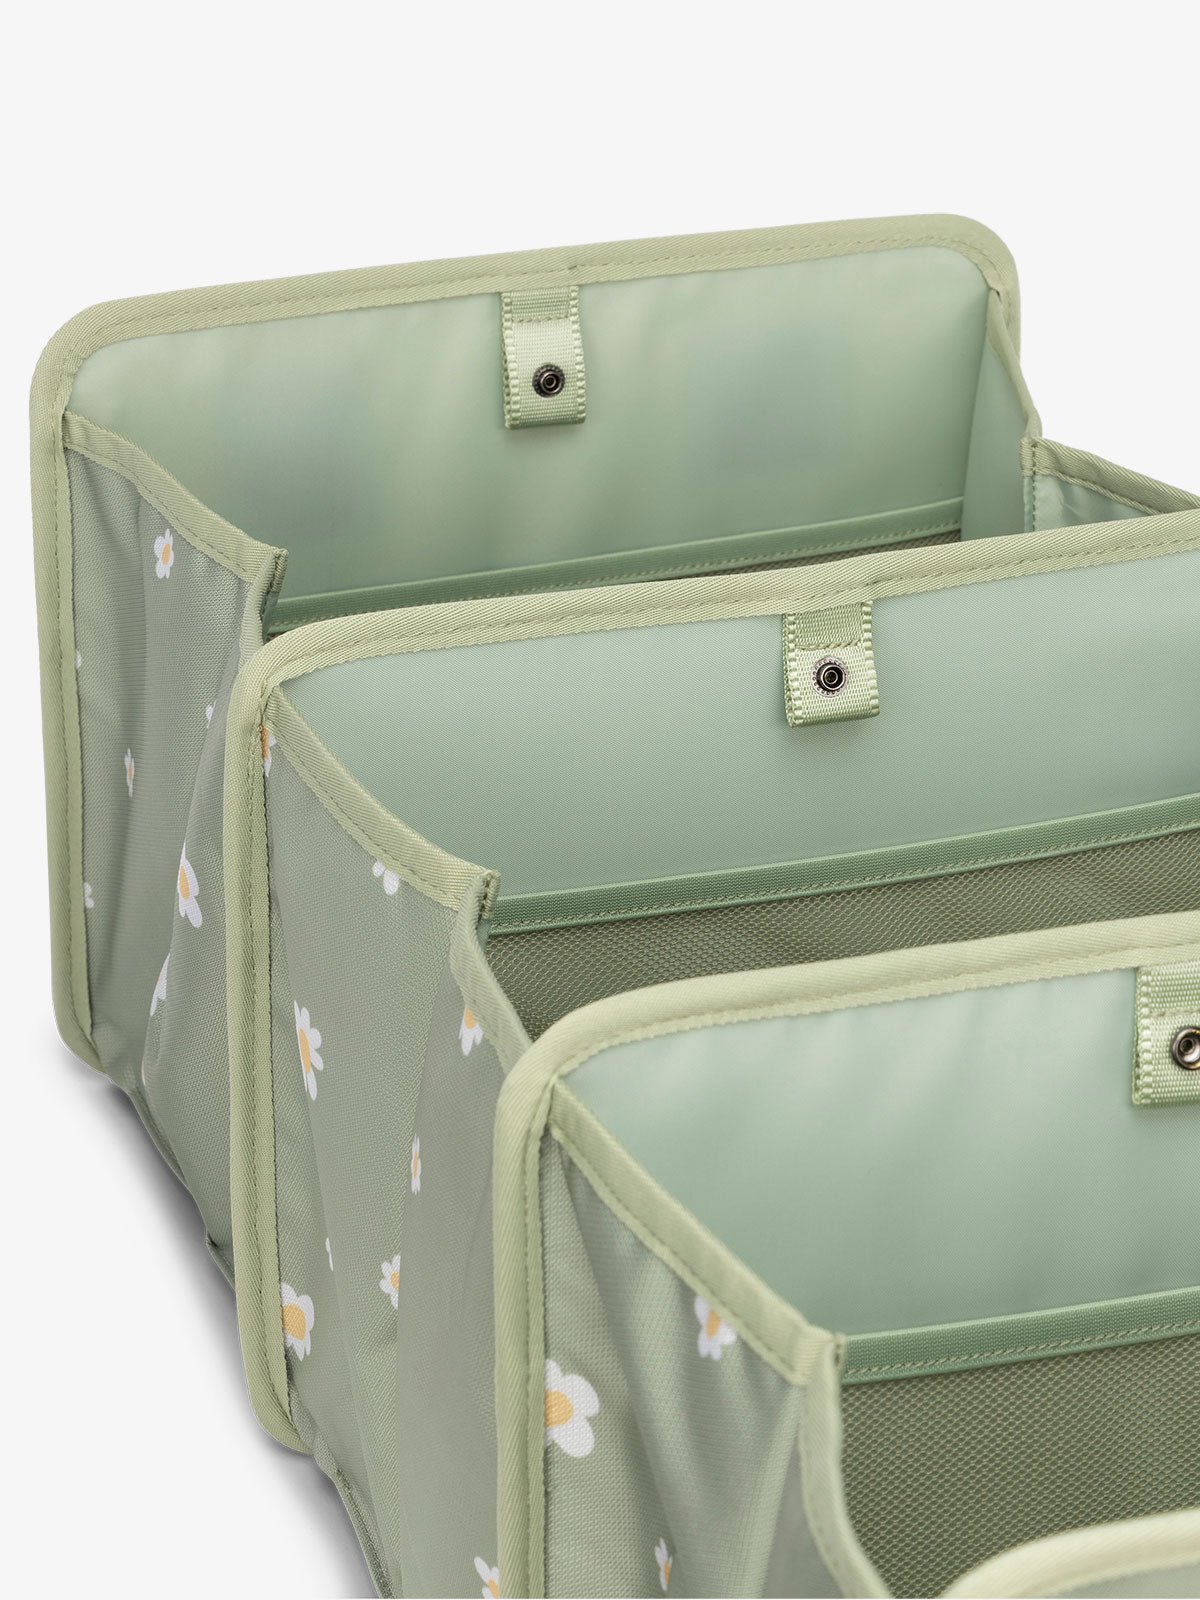 collapsible car trunk organizer featuring compartments in green daisy